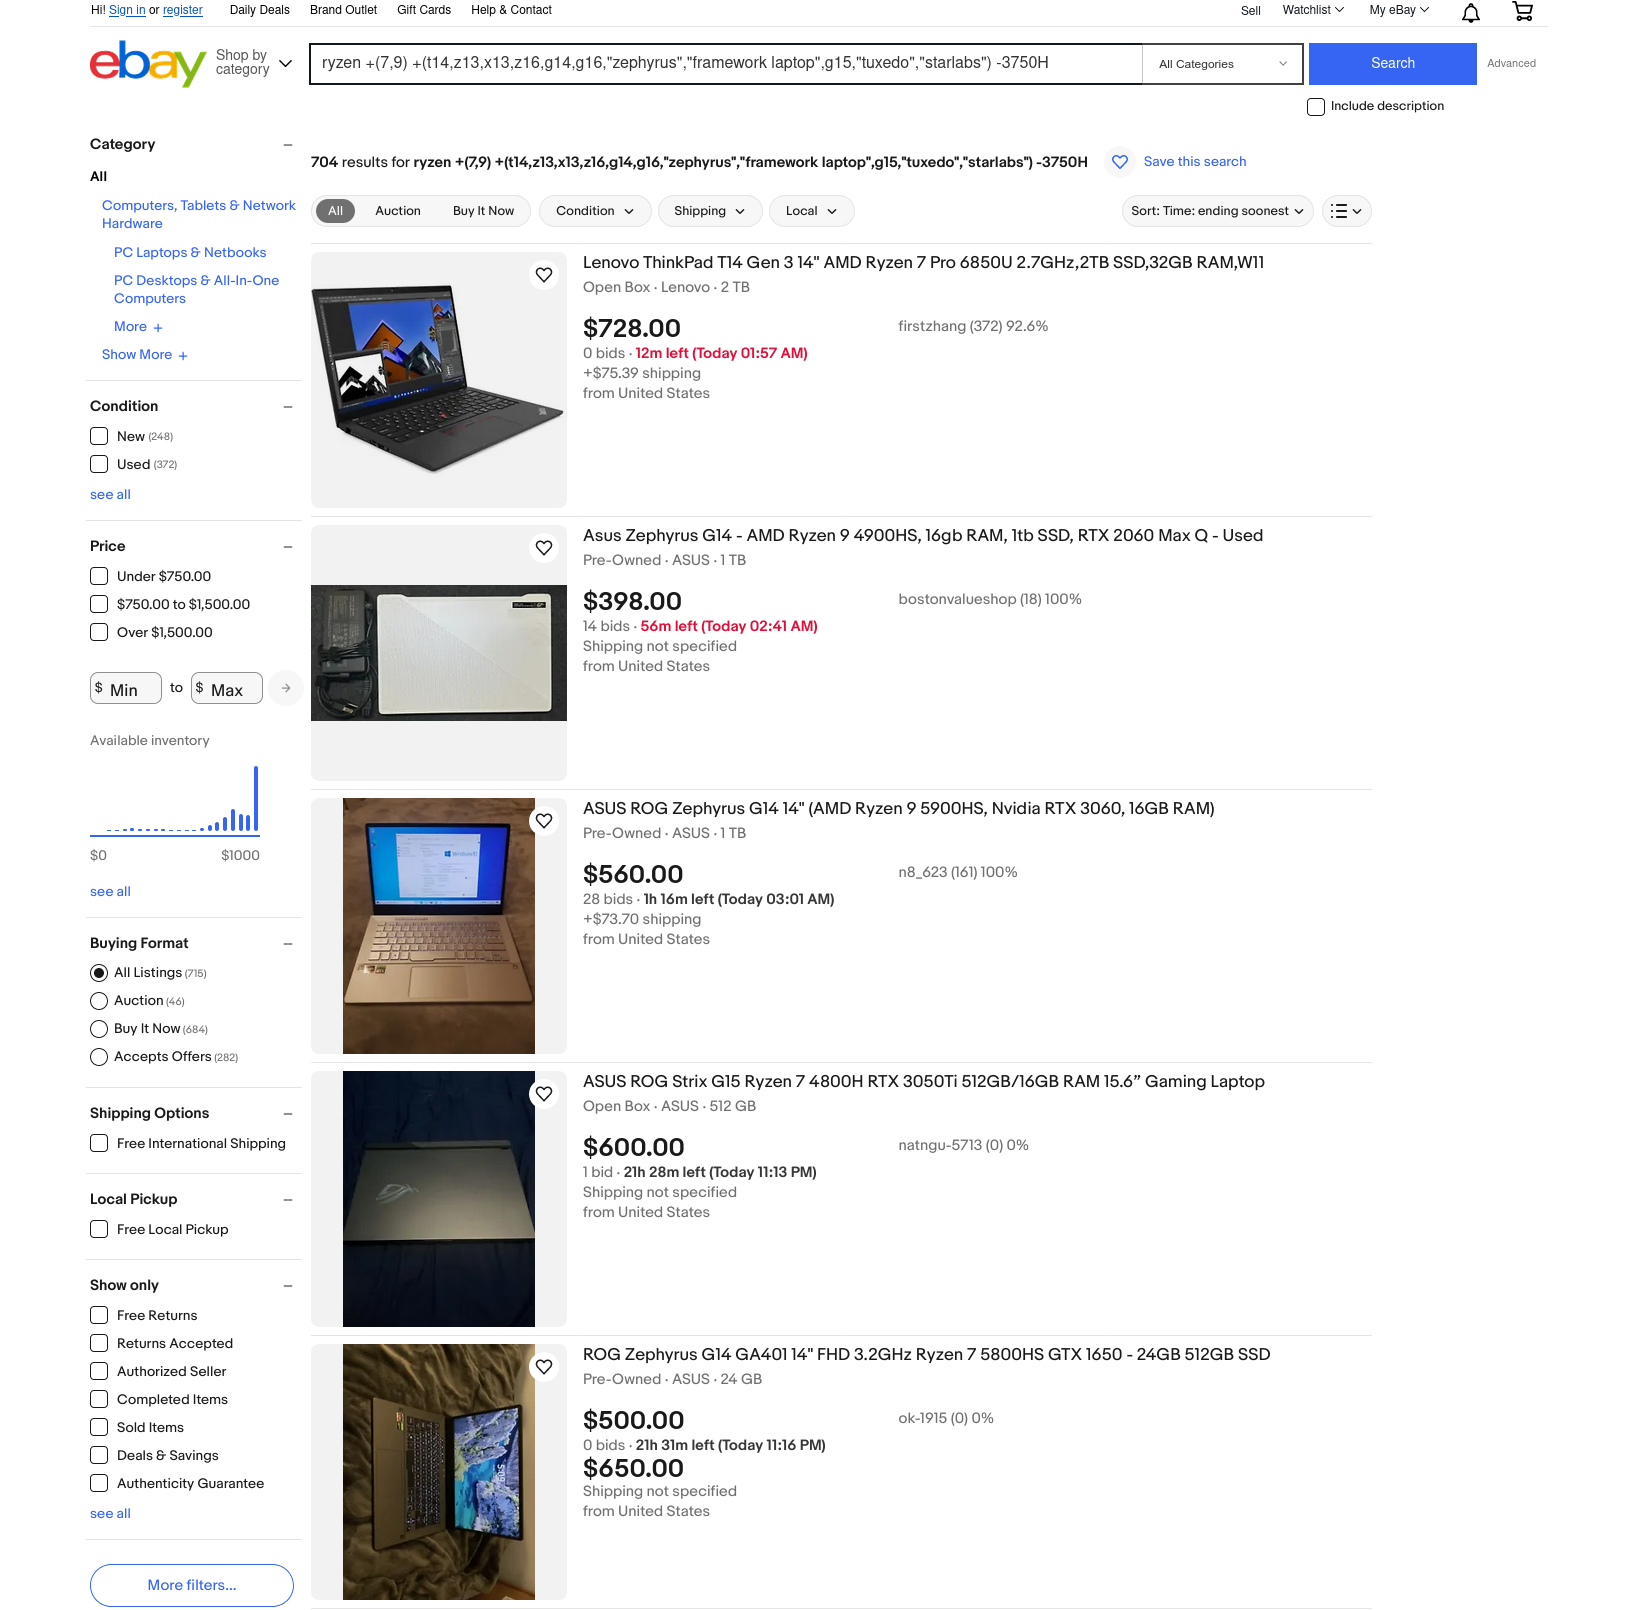 Example of how to narrow eBay search with AND/OR/NOT logical operators